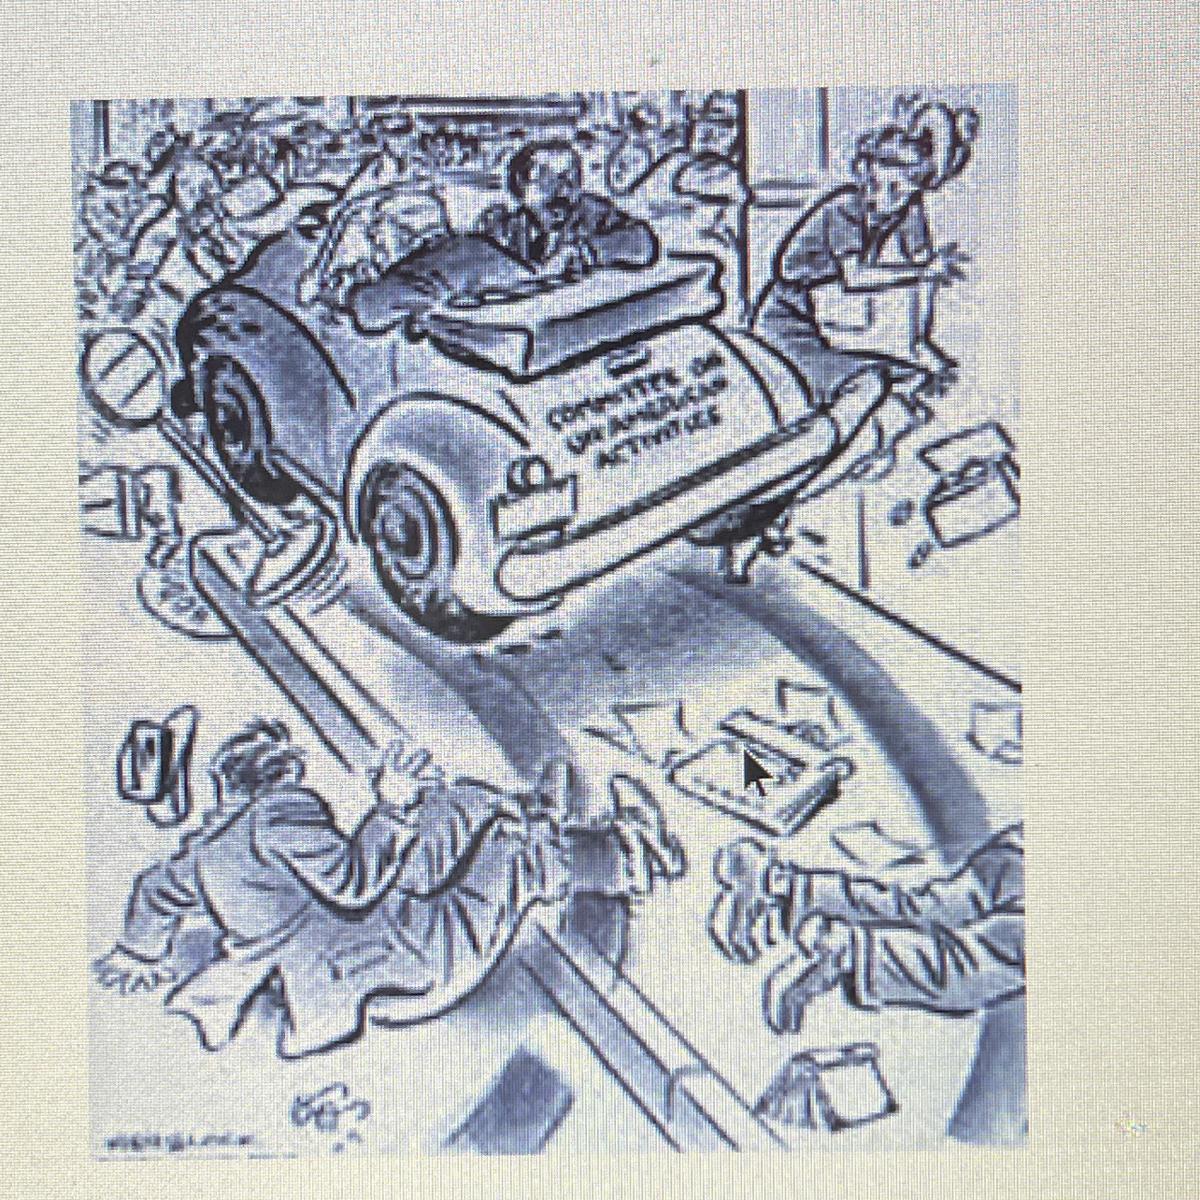 What Message Is The Cartoonist Trying To Convey Concerning HUAC?*A. HUAC Had The Right To Suspend Citizens